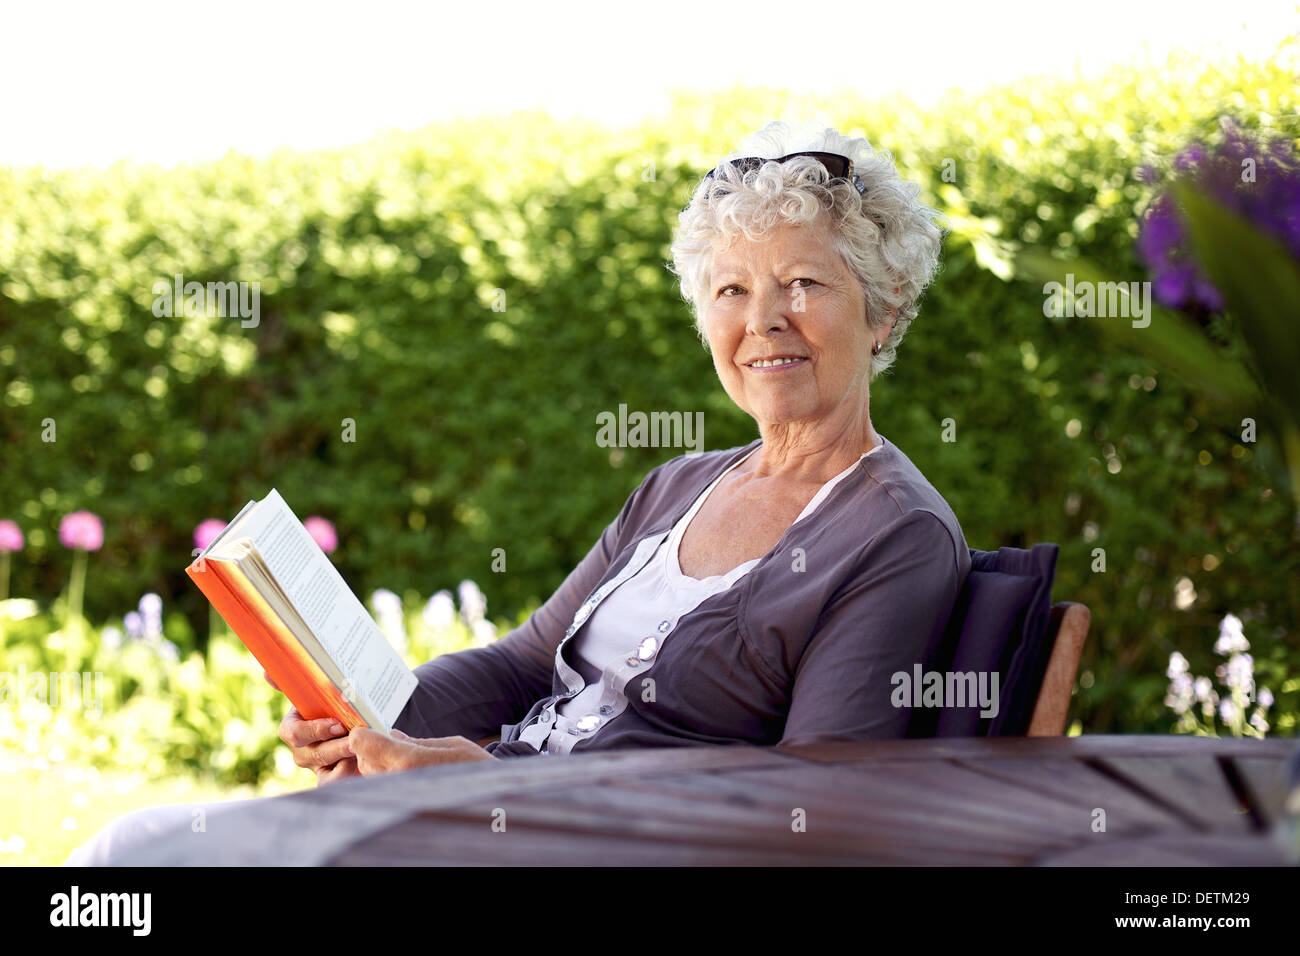 Happy senior woman with book in hand sitting in her backyard looking at camera smiling - Elder woman reading novel in garden Stock Photo